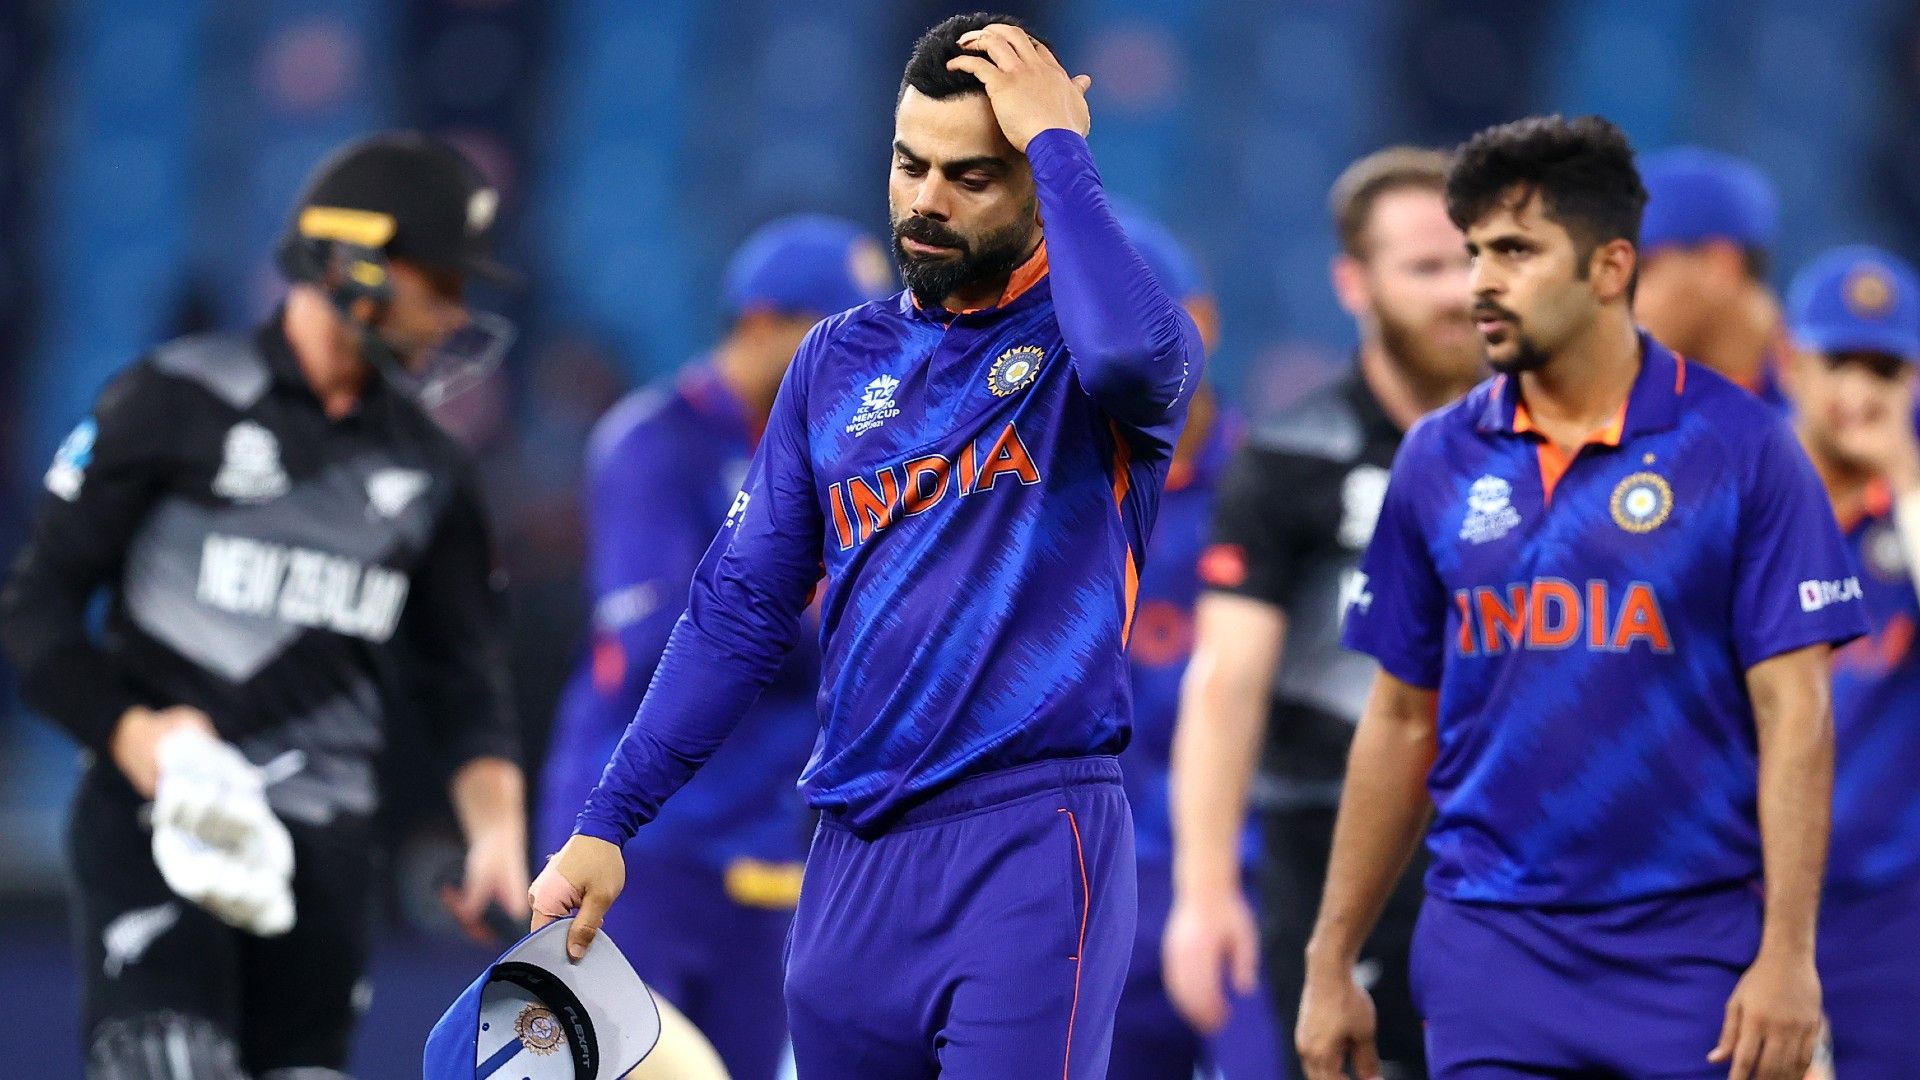 India crushed again at T20 World Cup, this time by New Zealand 